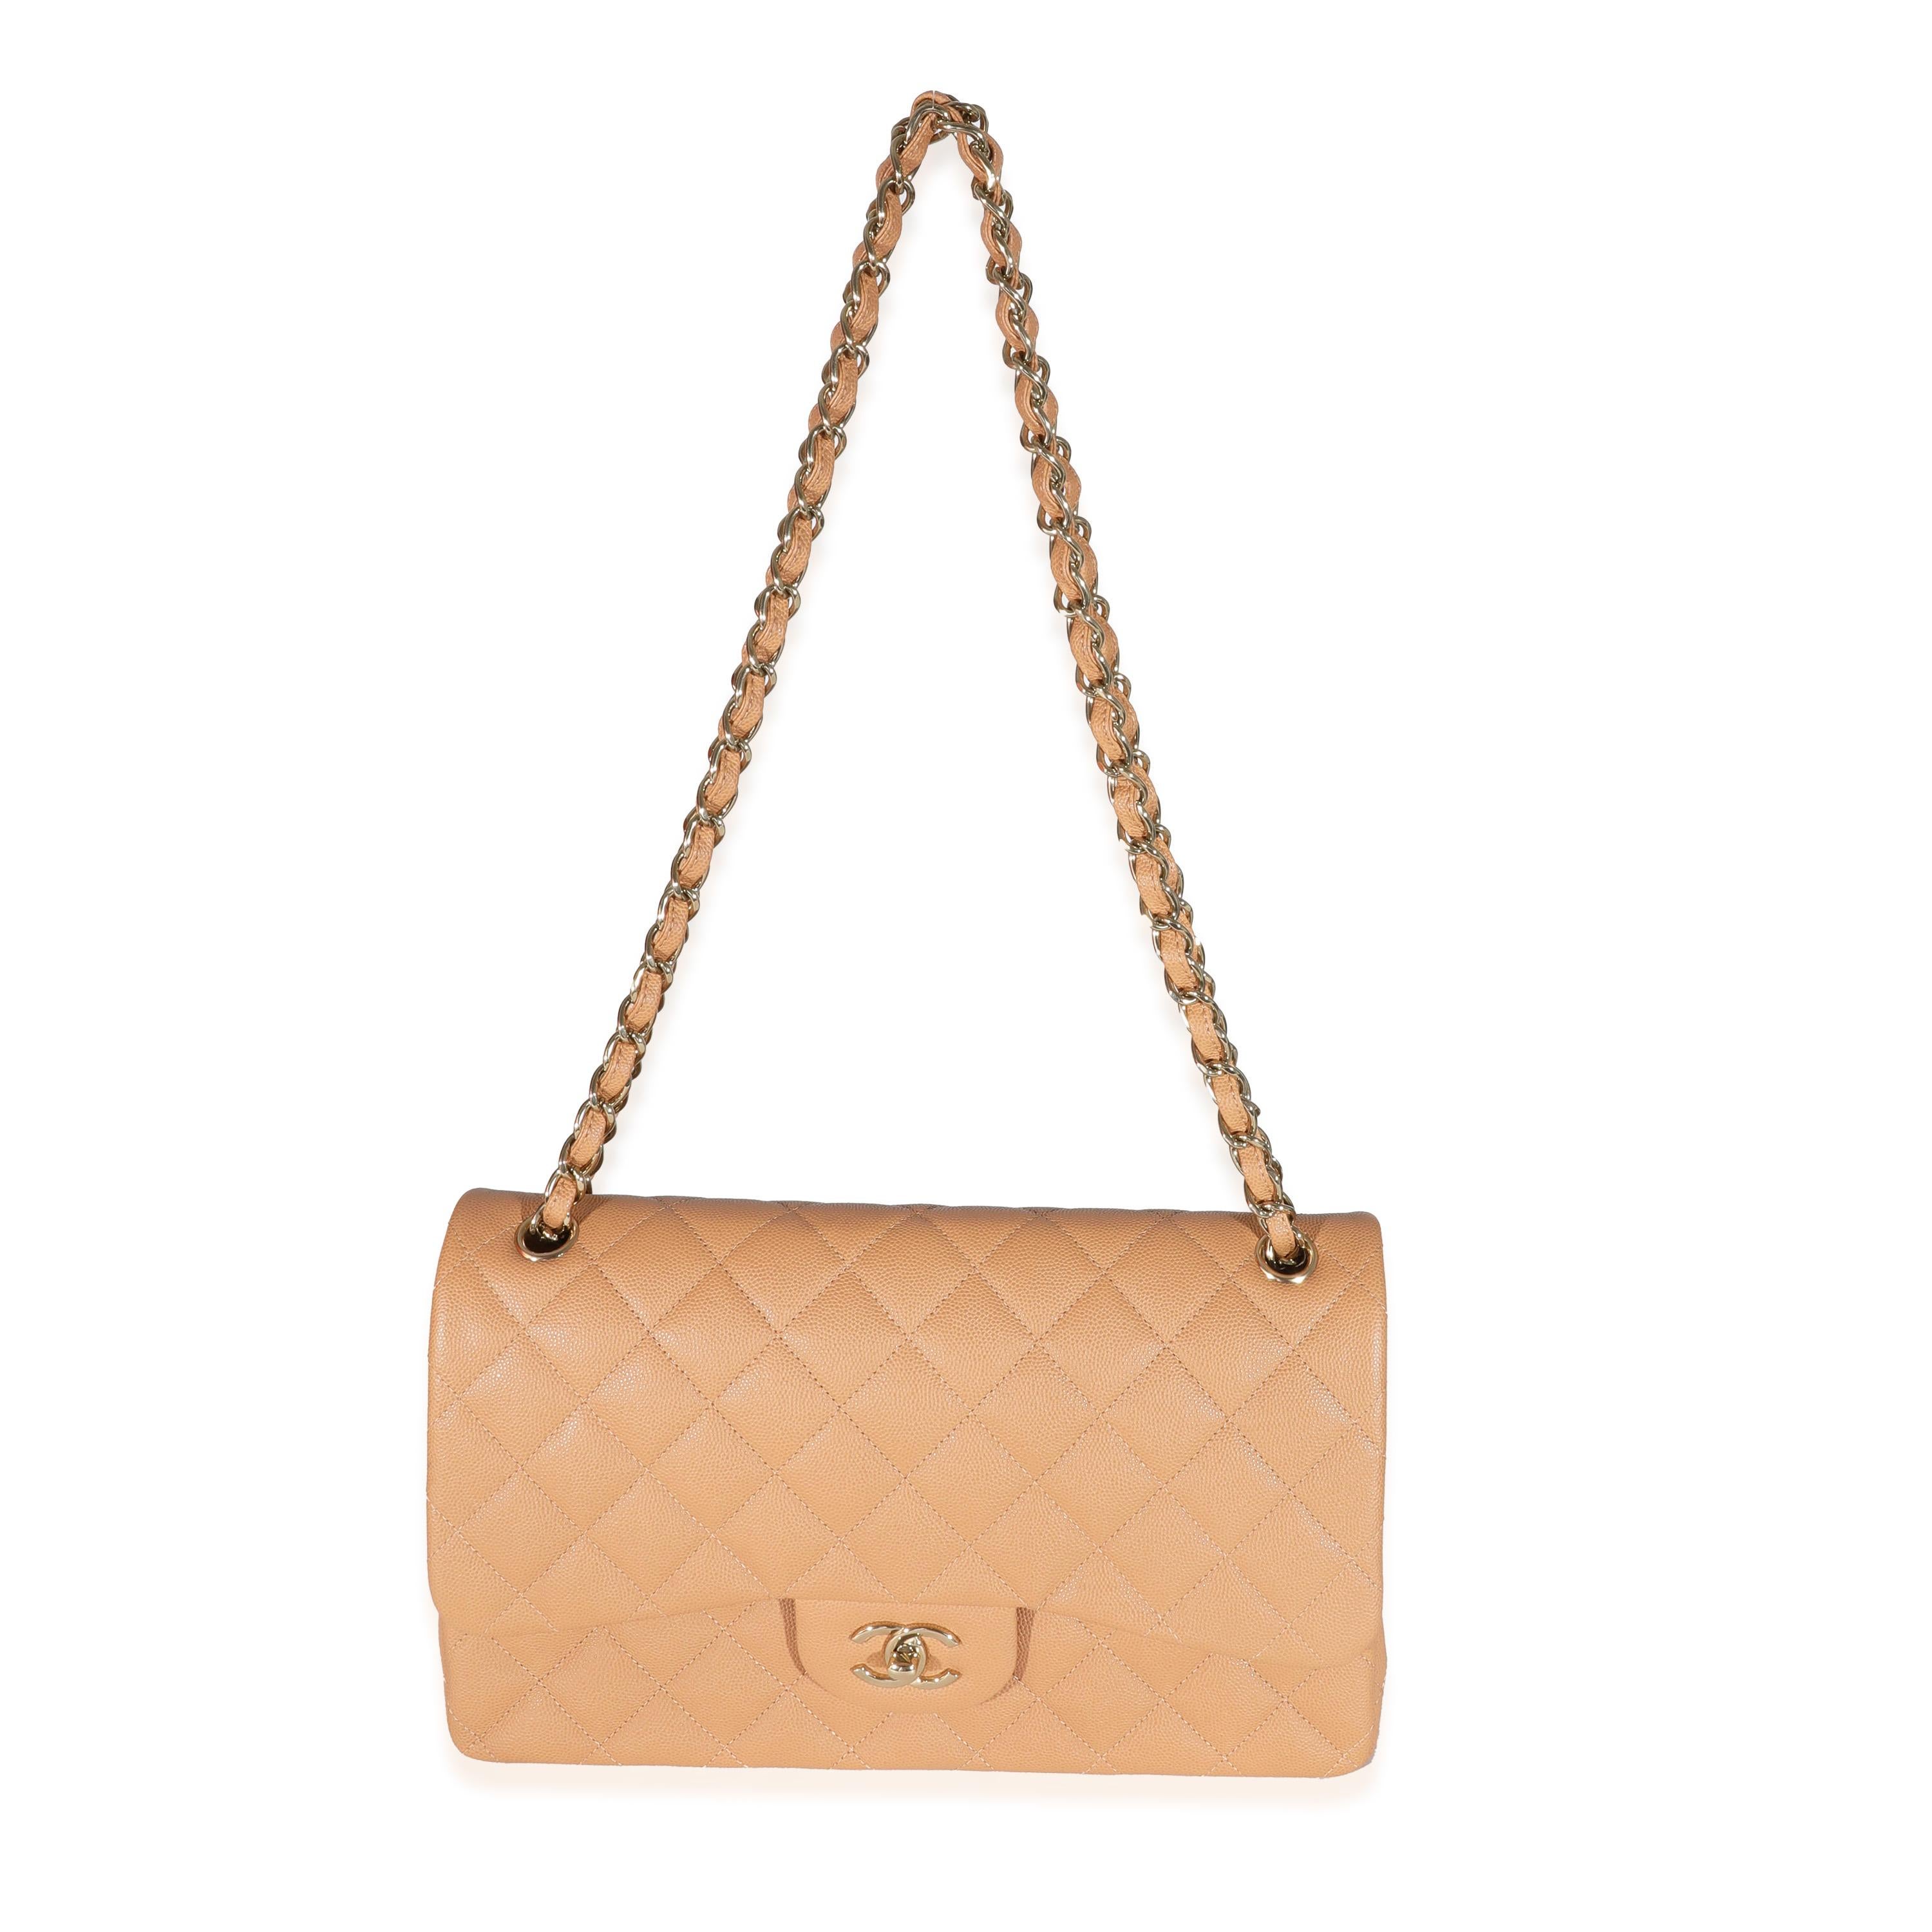 Listing Title: Chanel 21P Caramel Caviar Jumbo Classic Double Flap Bag
SKU: 131705
MSRP: 11000.00
Condition: Pre-owned 
Condition Description: A timeless classic that never goes out of style, the flap bag from Chanel dates back to 1955 and has seen